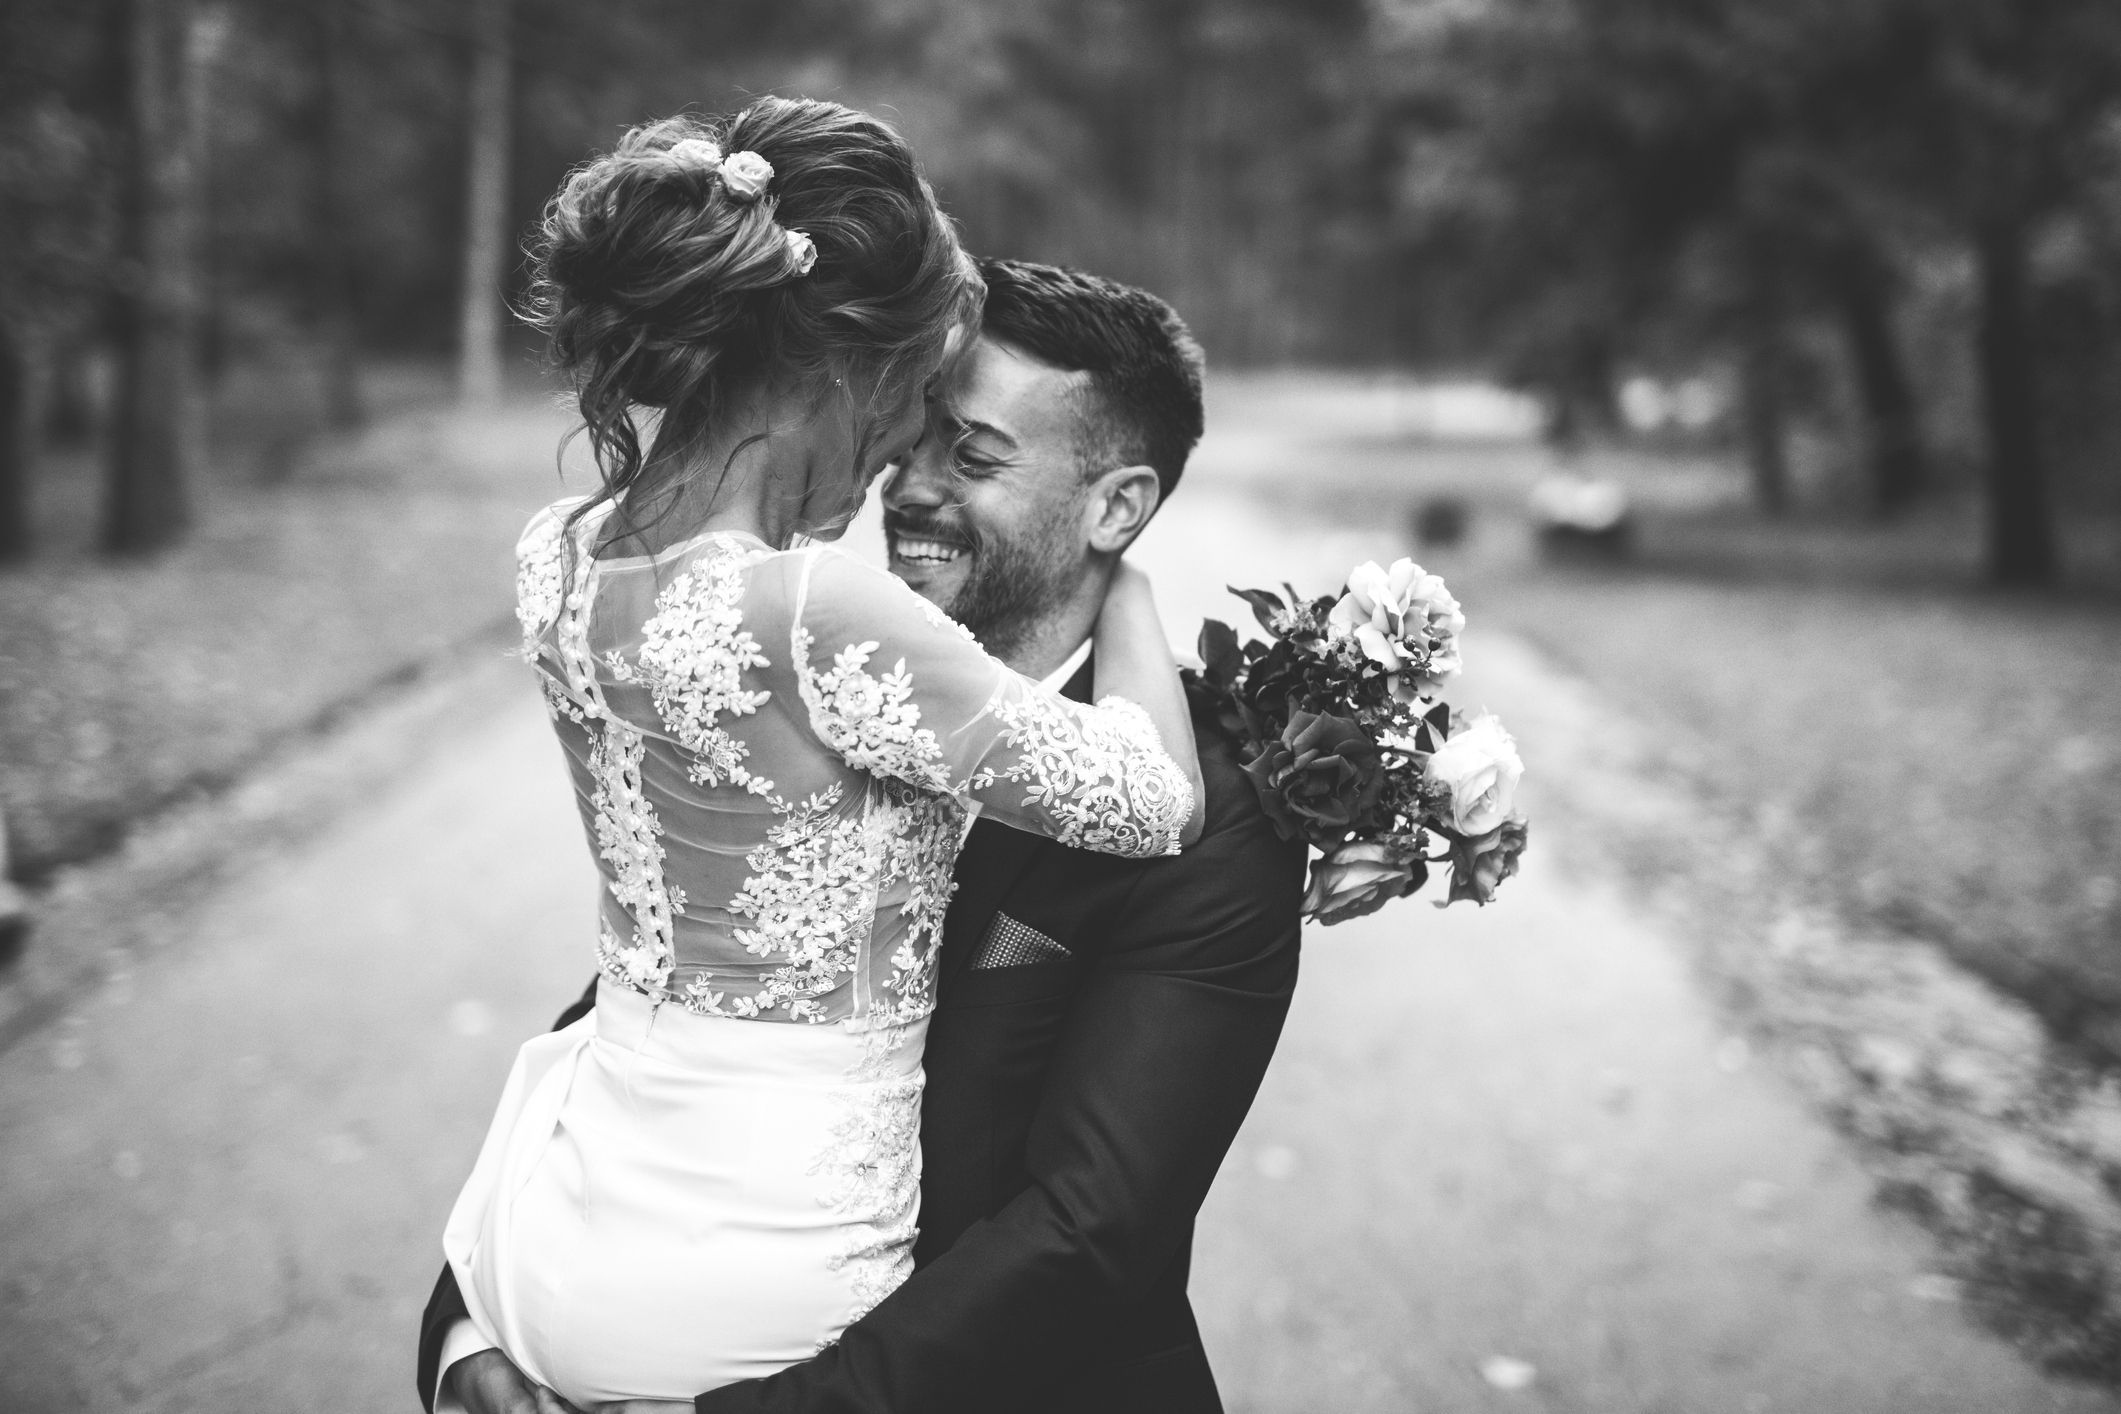 40 Romantic Wedding Photography ideas from world famous Photographers